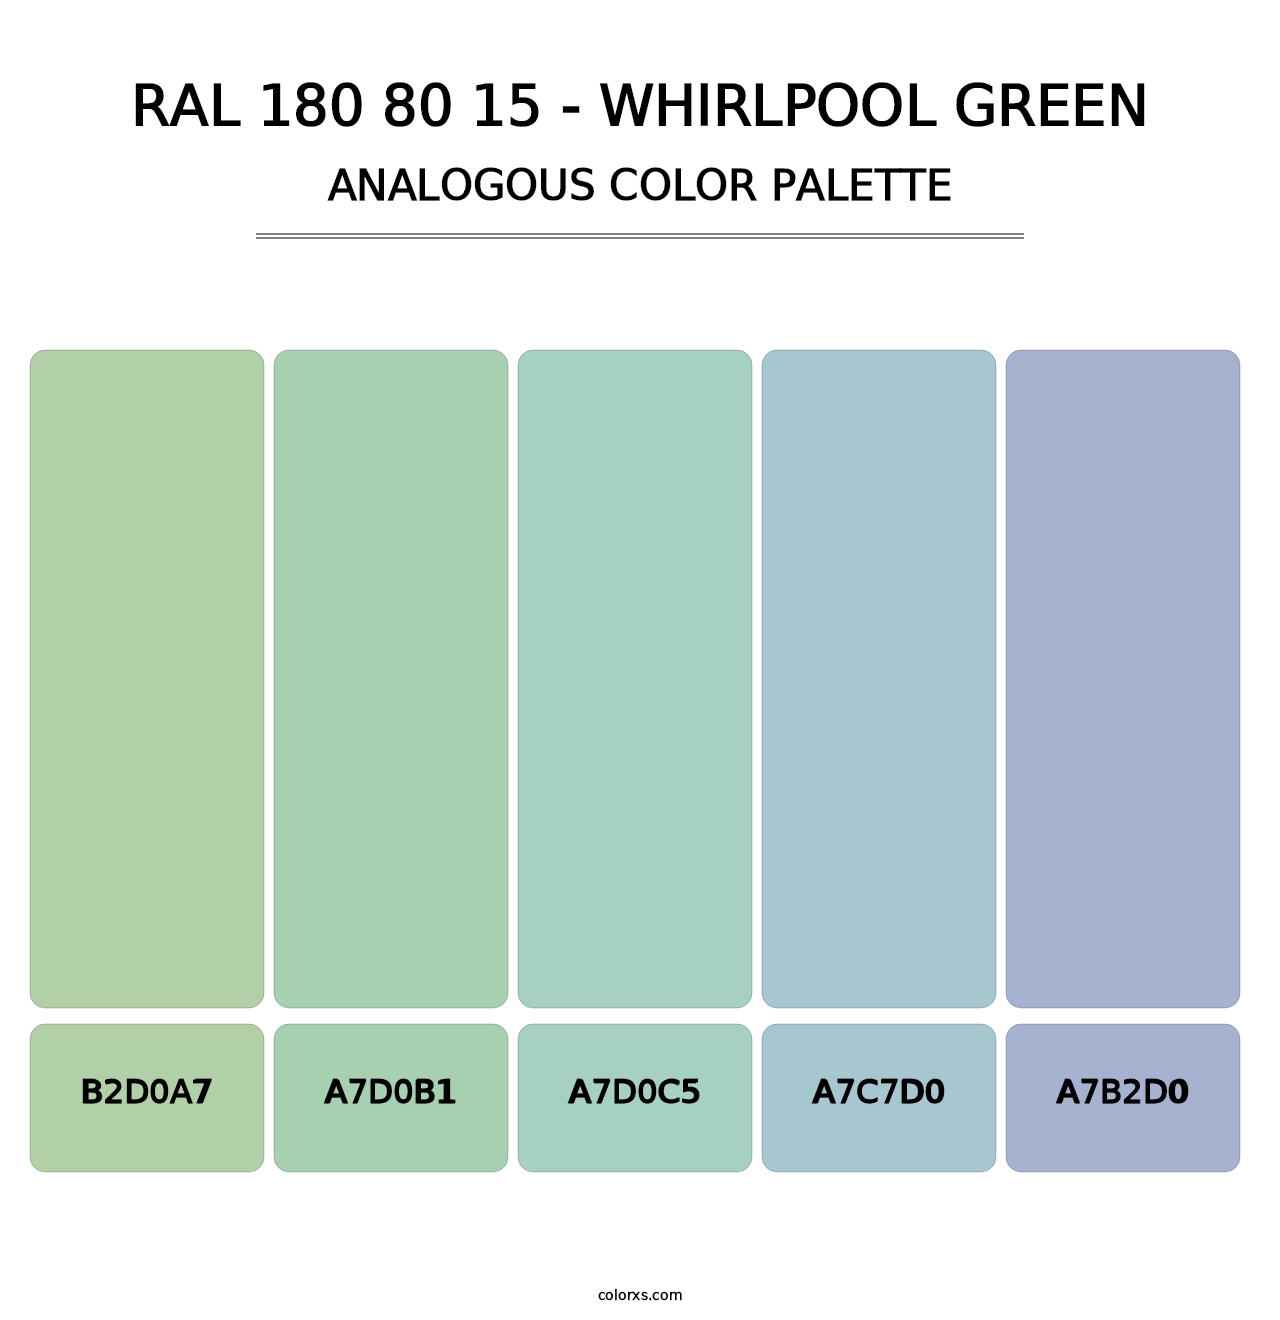 RAL 180 80 15 - Whirlpool Green - Analogous Color Palette